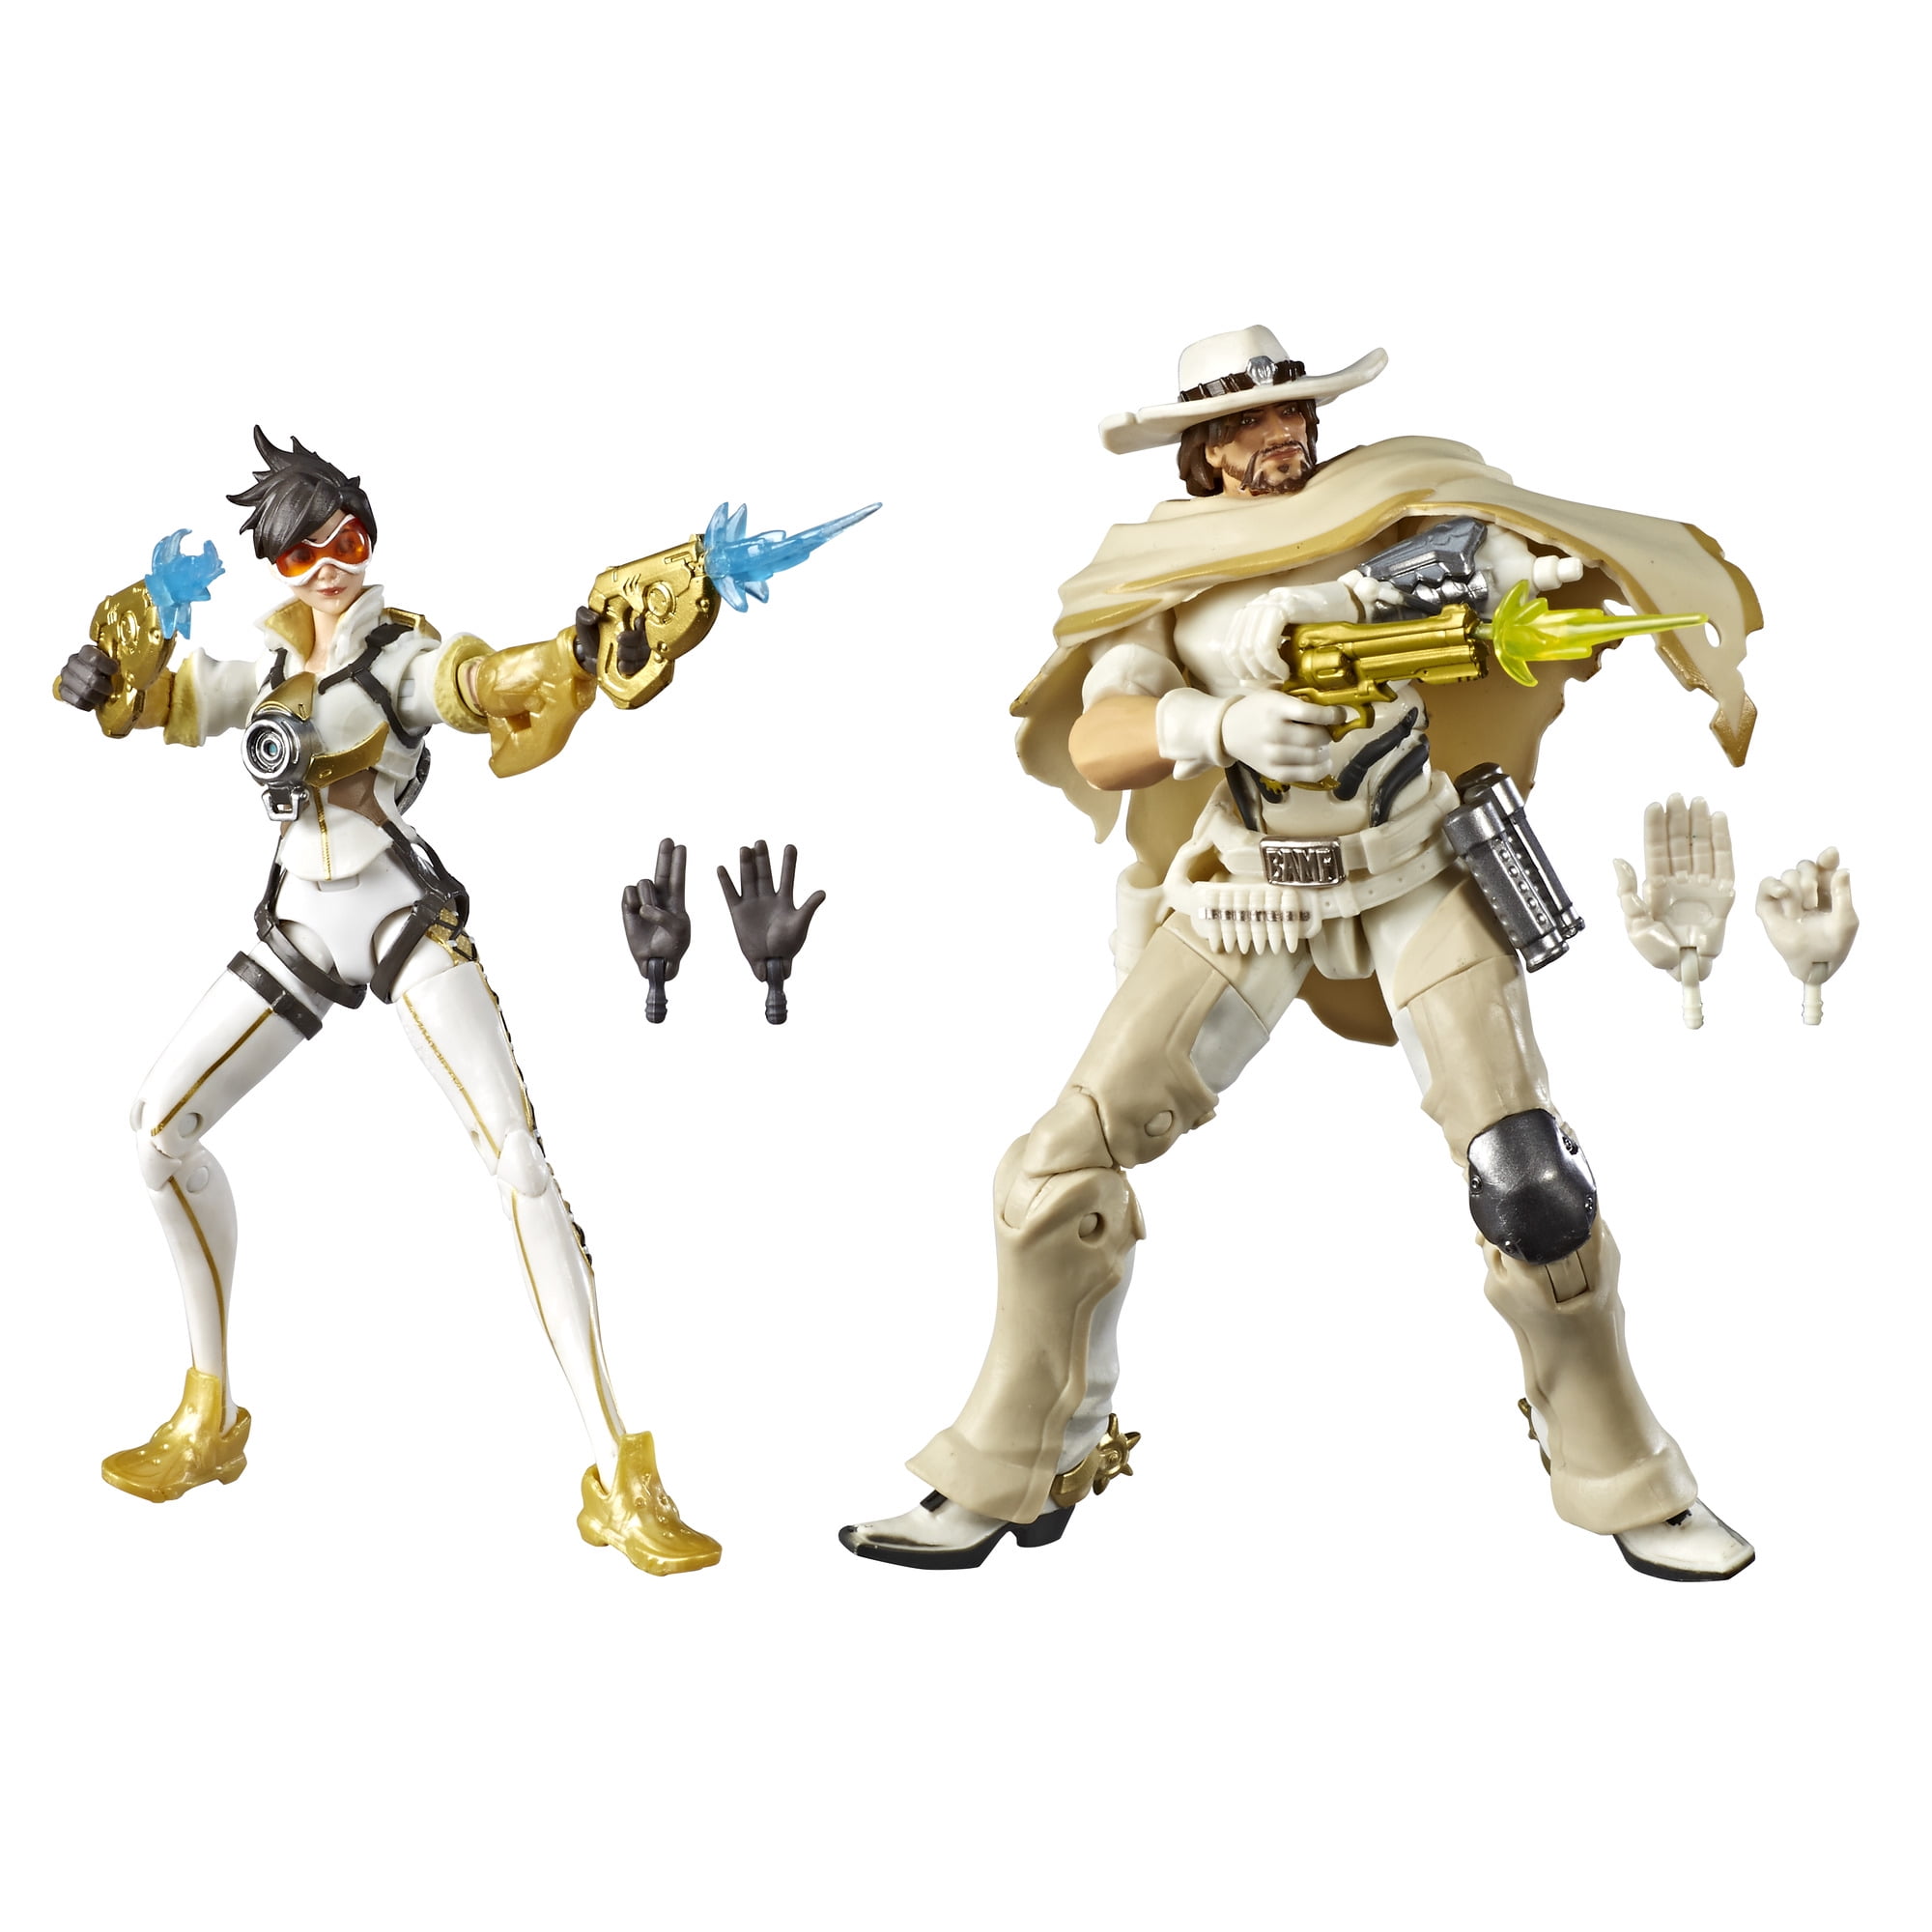 Overwatch Ultimates Series Posh (Tracer), White Hat (McCree) Skin